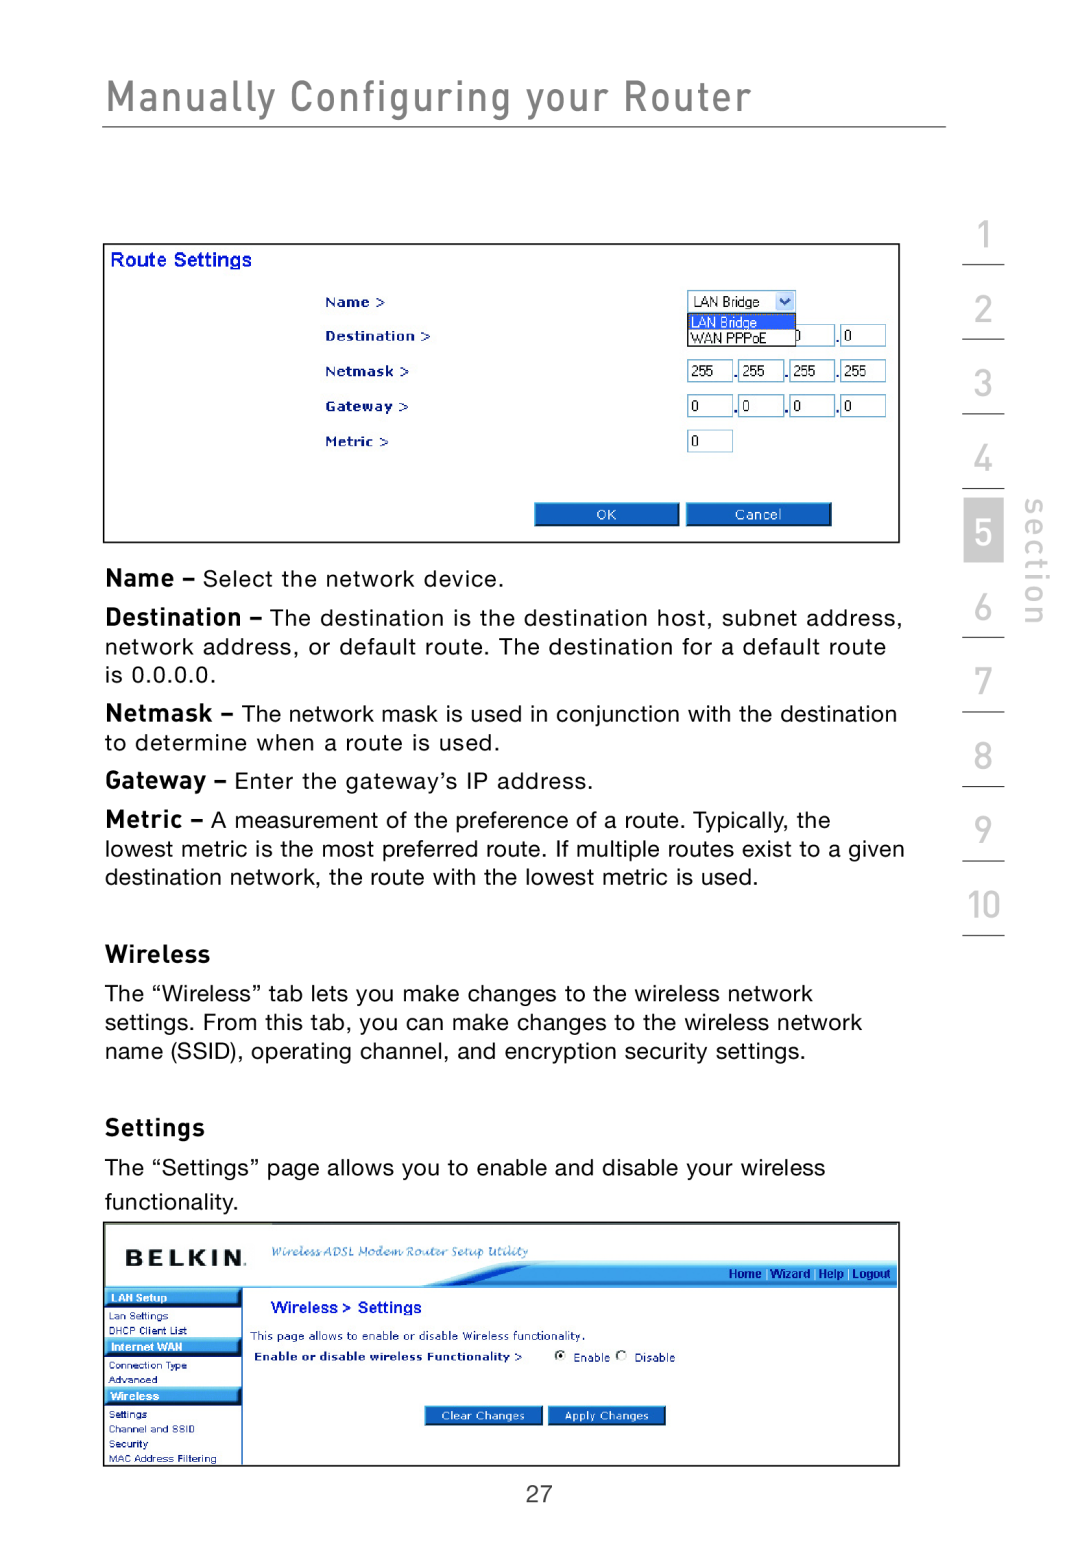 Belkin F5D7632UK4 user manual Wireless, Settings, Manually Configuring your Router, section 